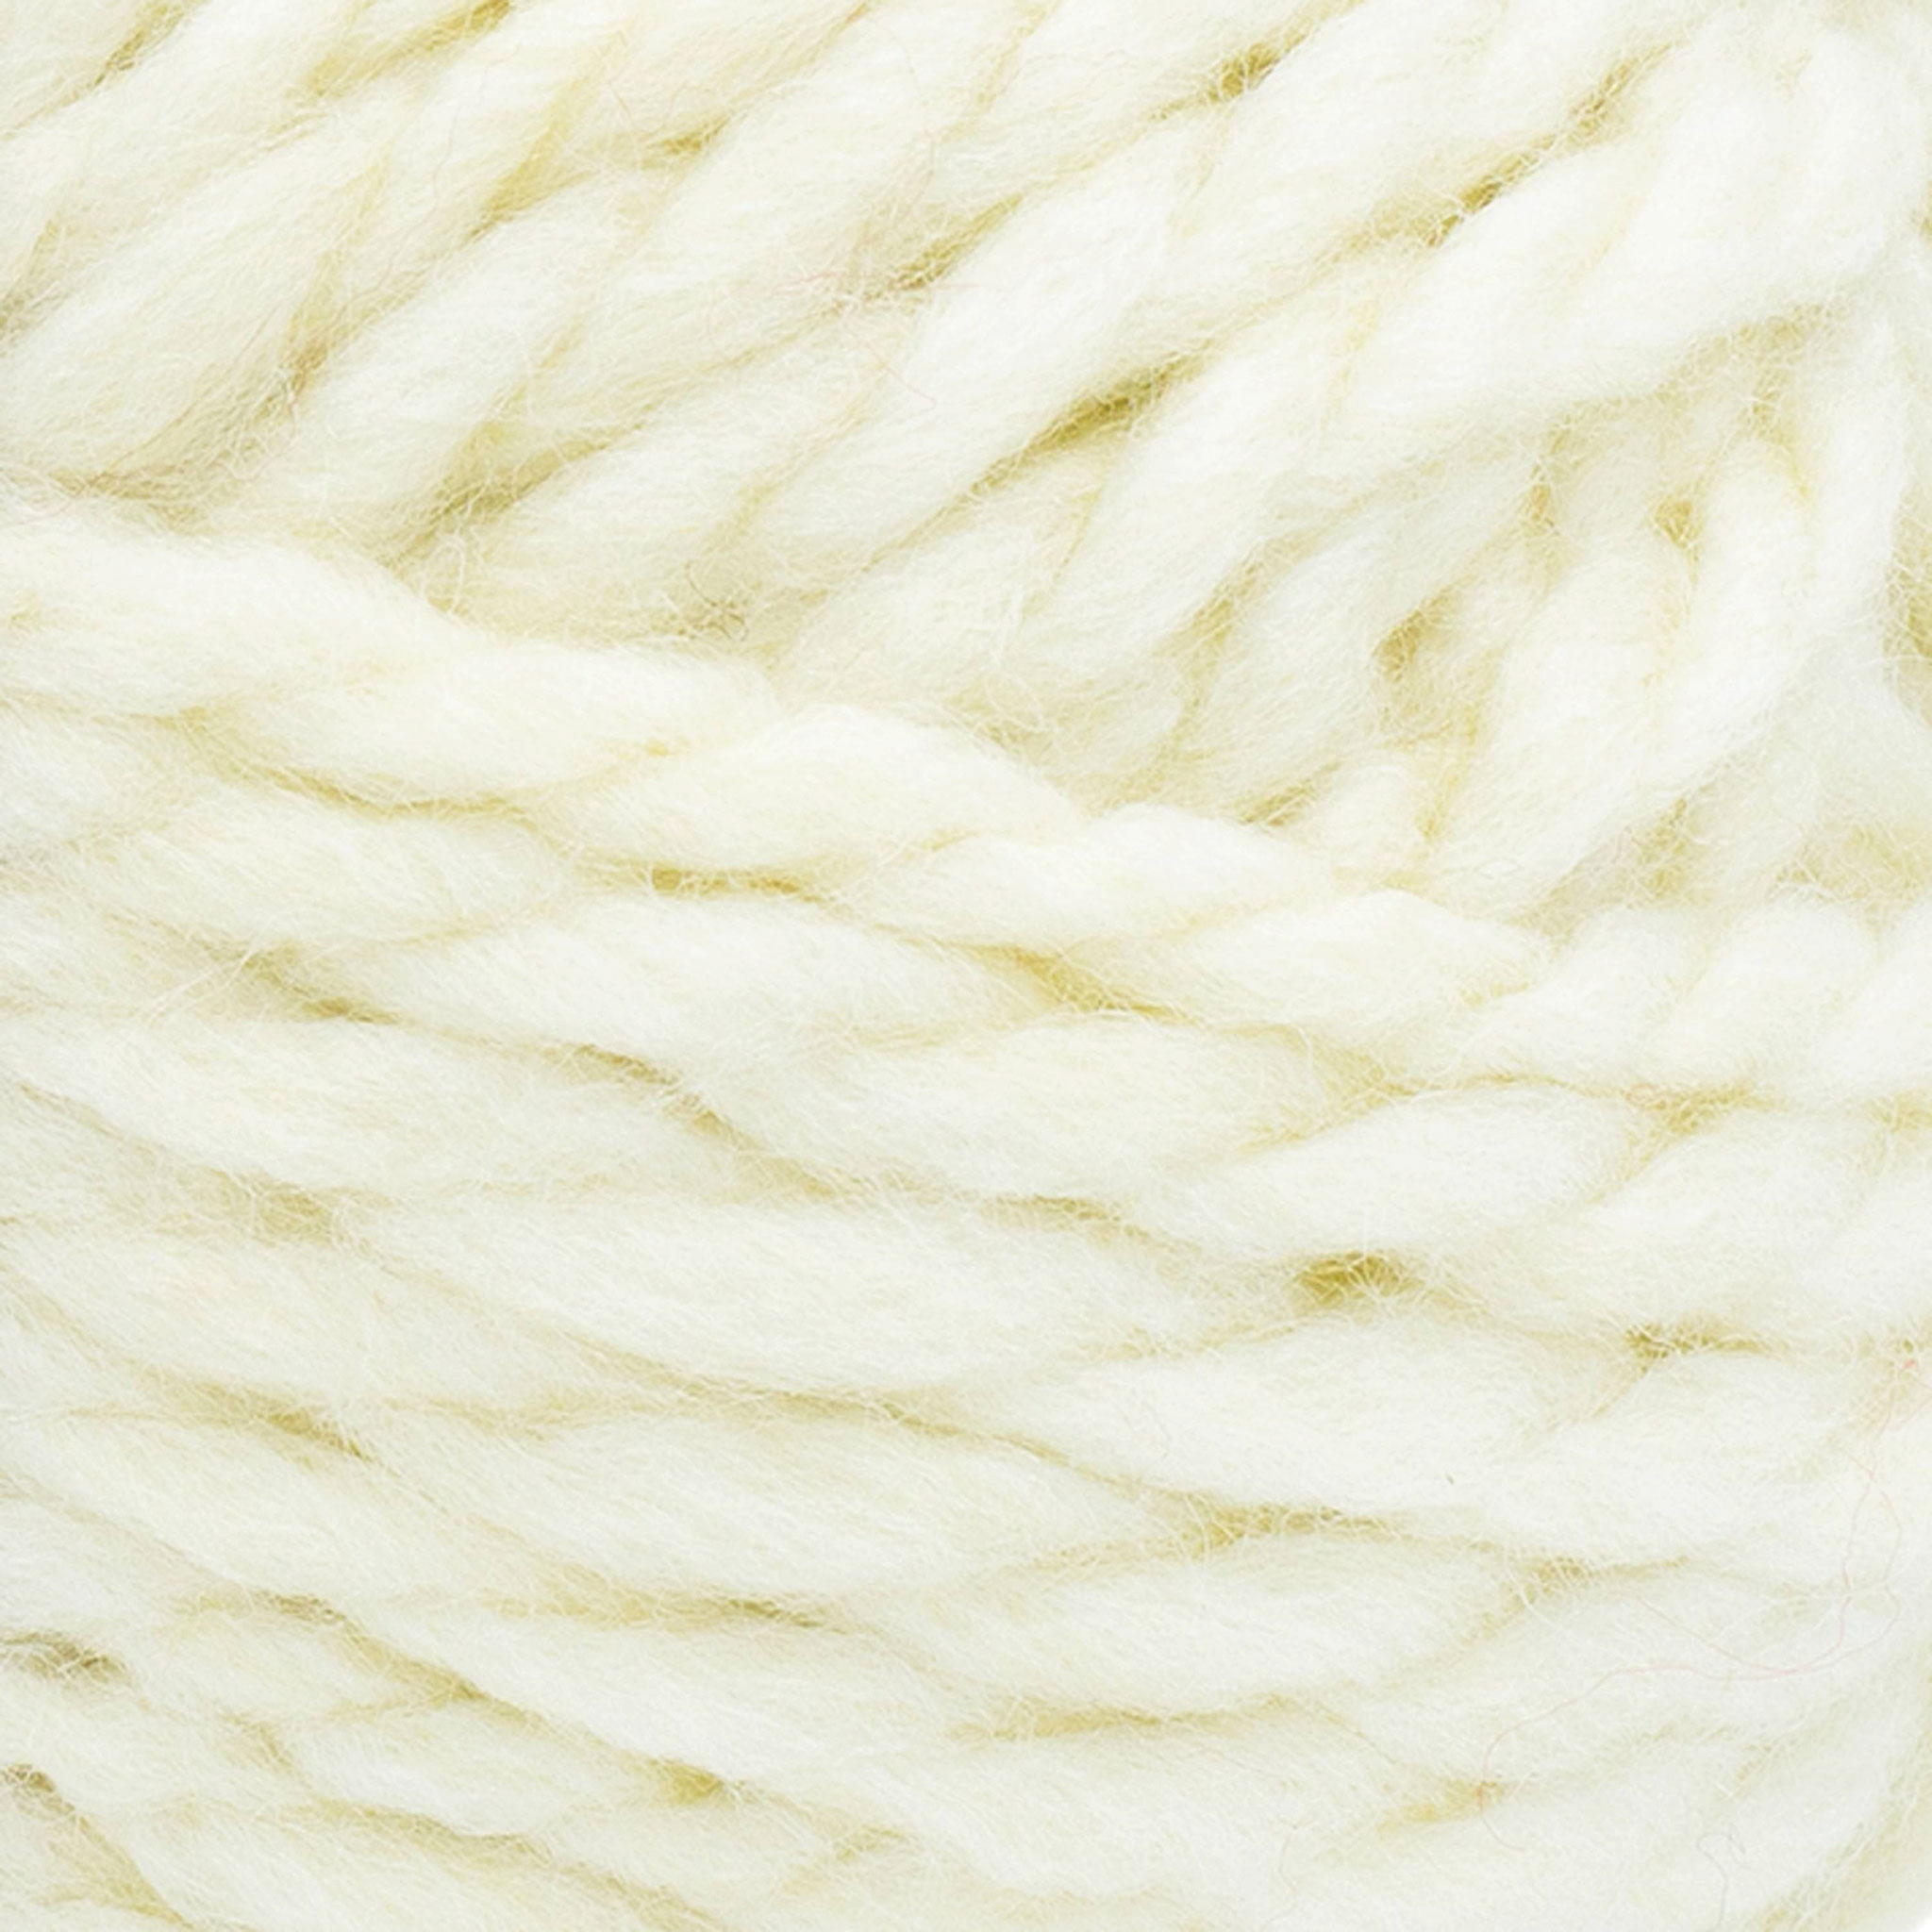 Lion Brand Wool Ease Thick & Quick Hoyas Black and White Super Bulky Yarn  Black and White Yarn Wool Yarn discontinued 